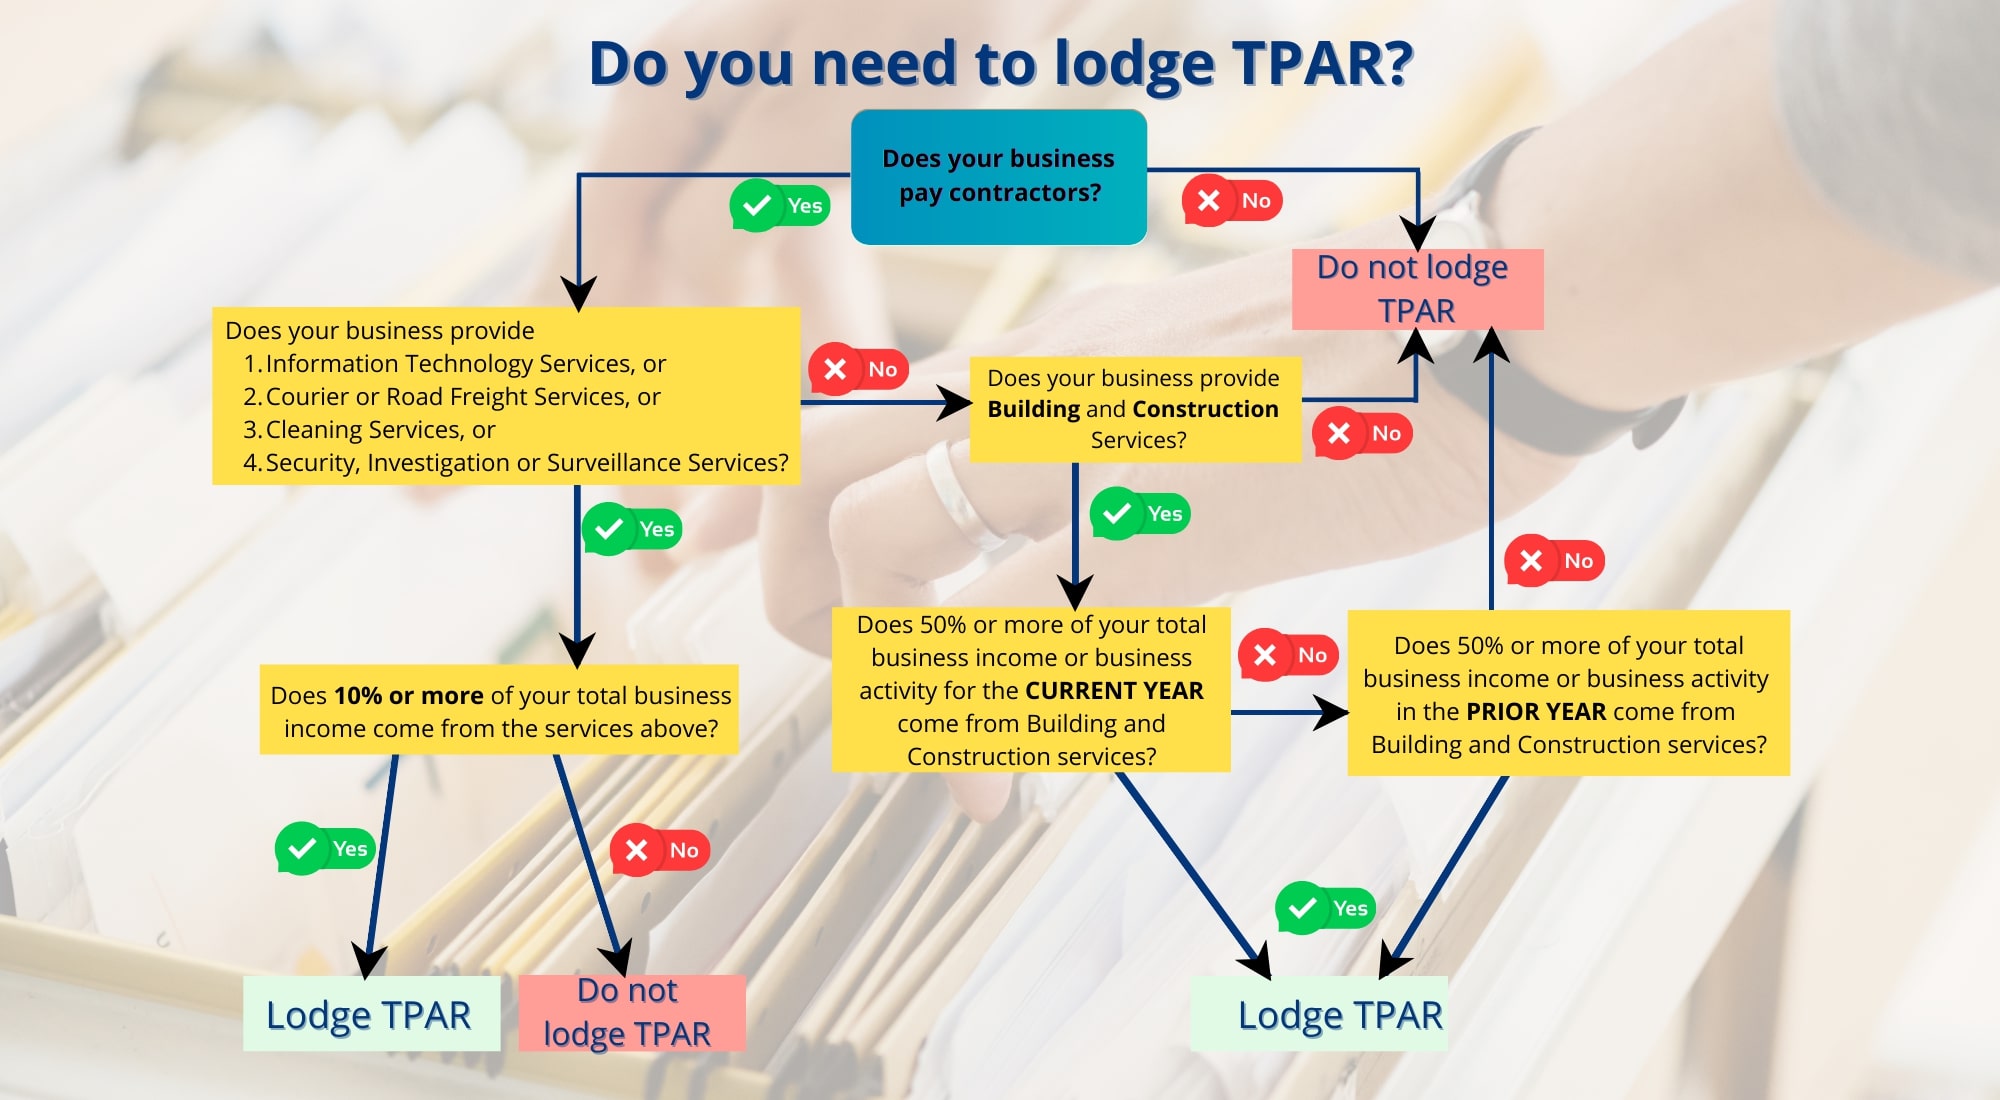 This flowchart will help you identify if you need to lodge TPAR.